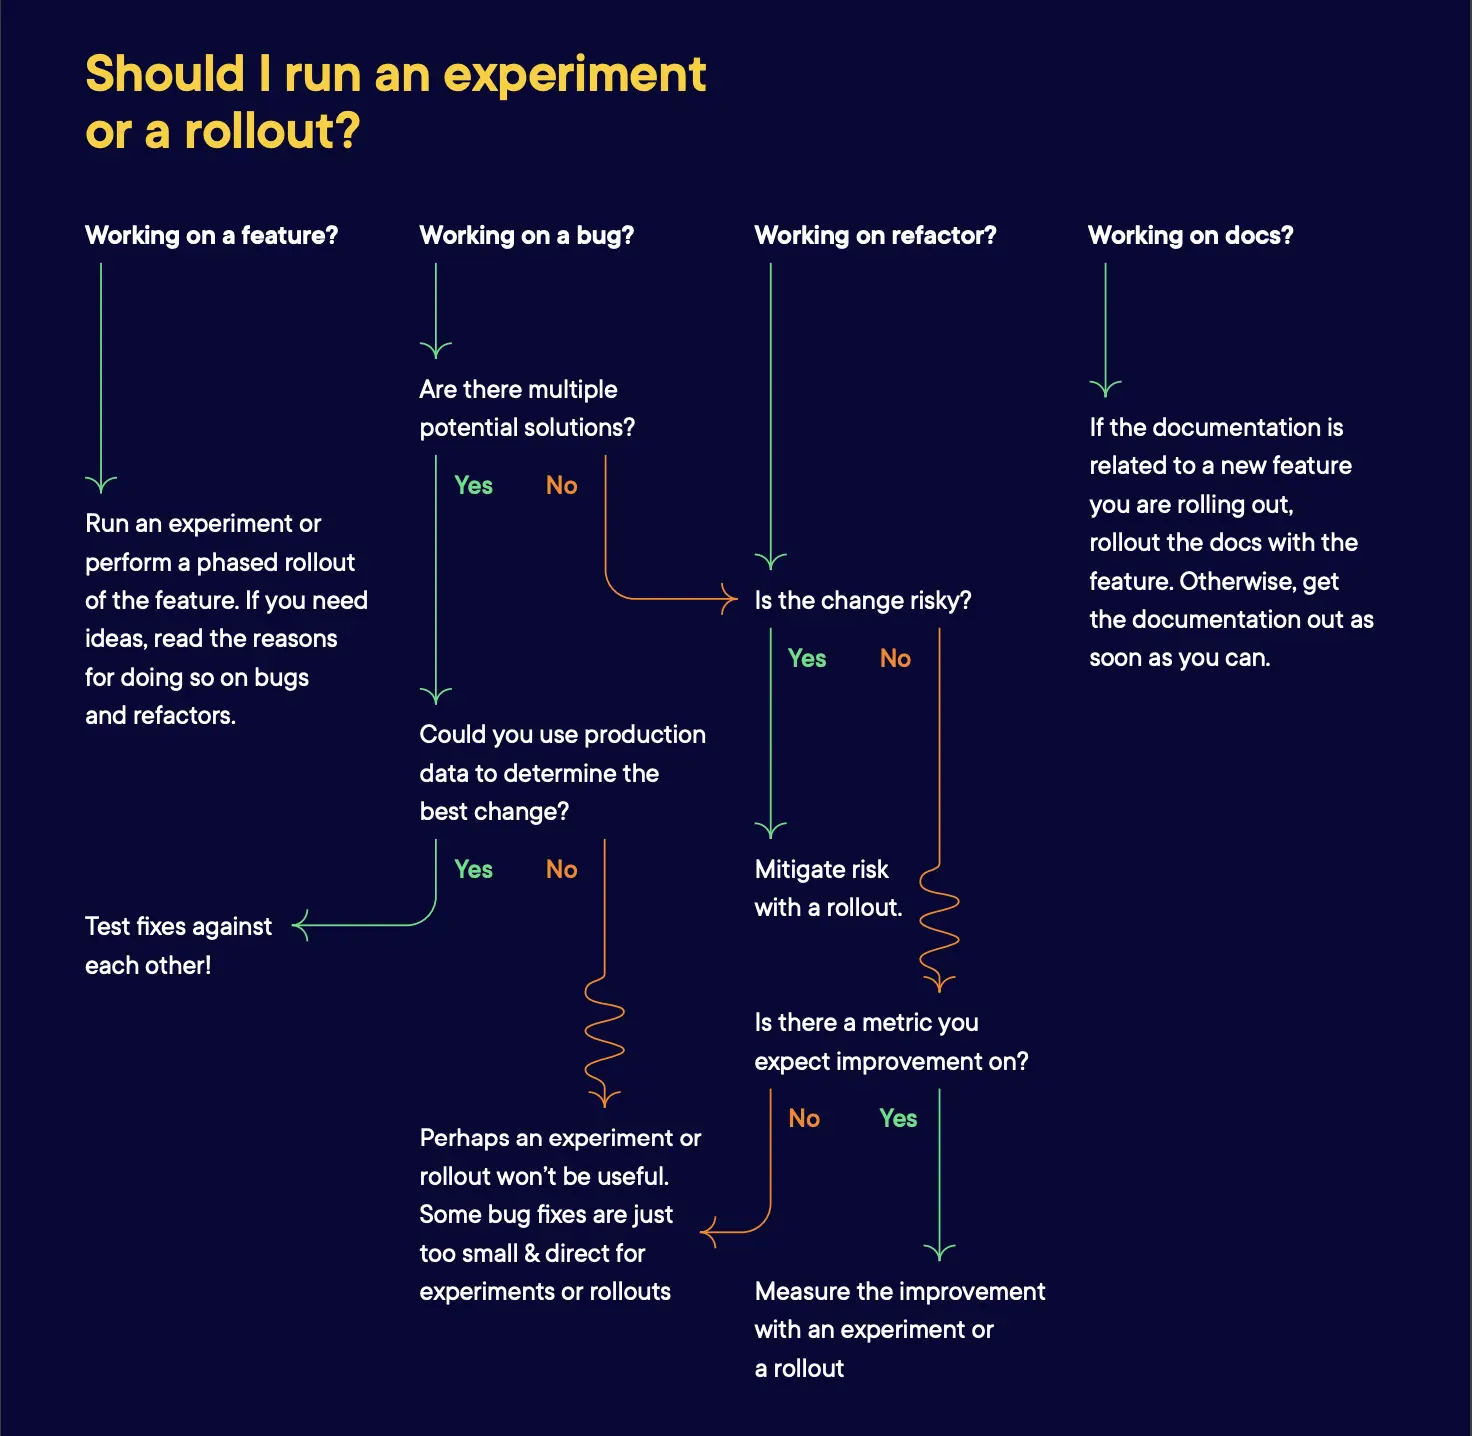 Image explaining should you run an experiment or do a roll out